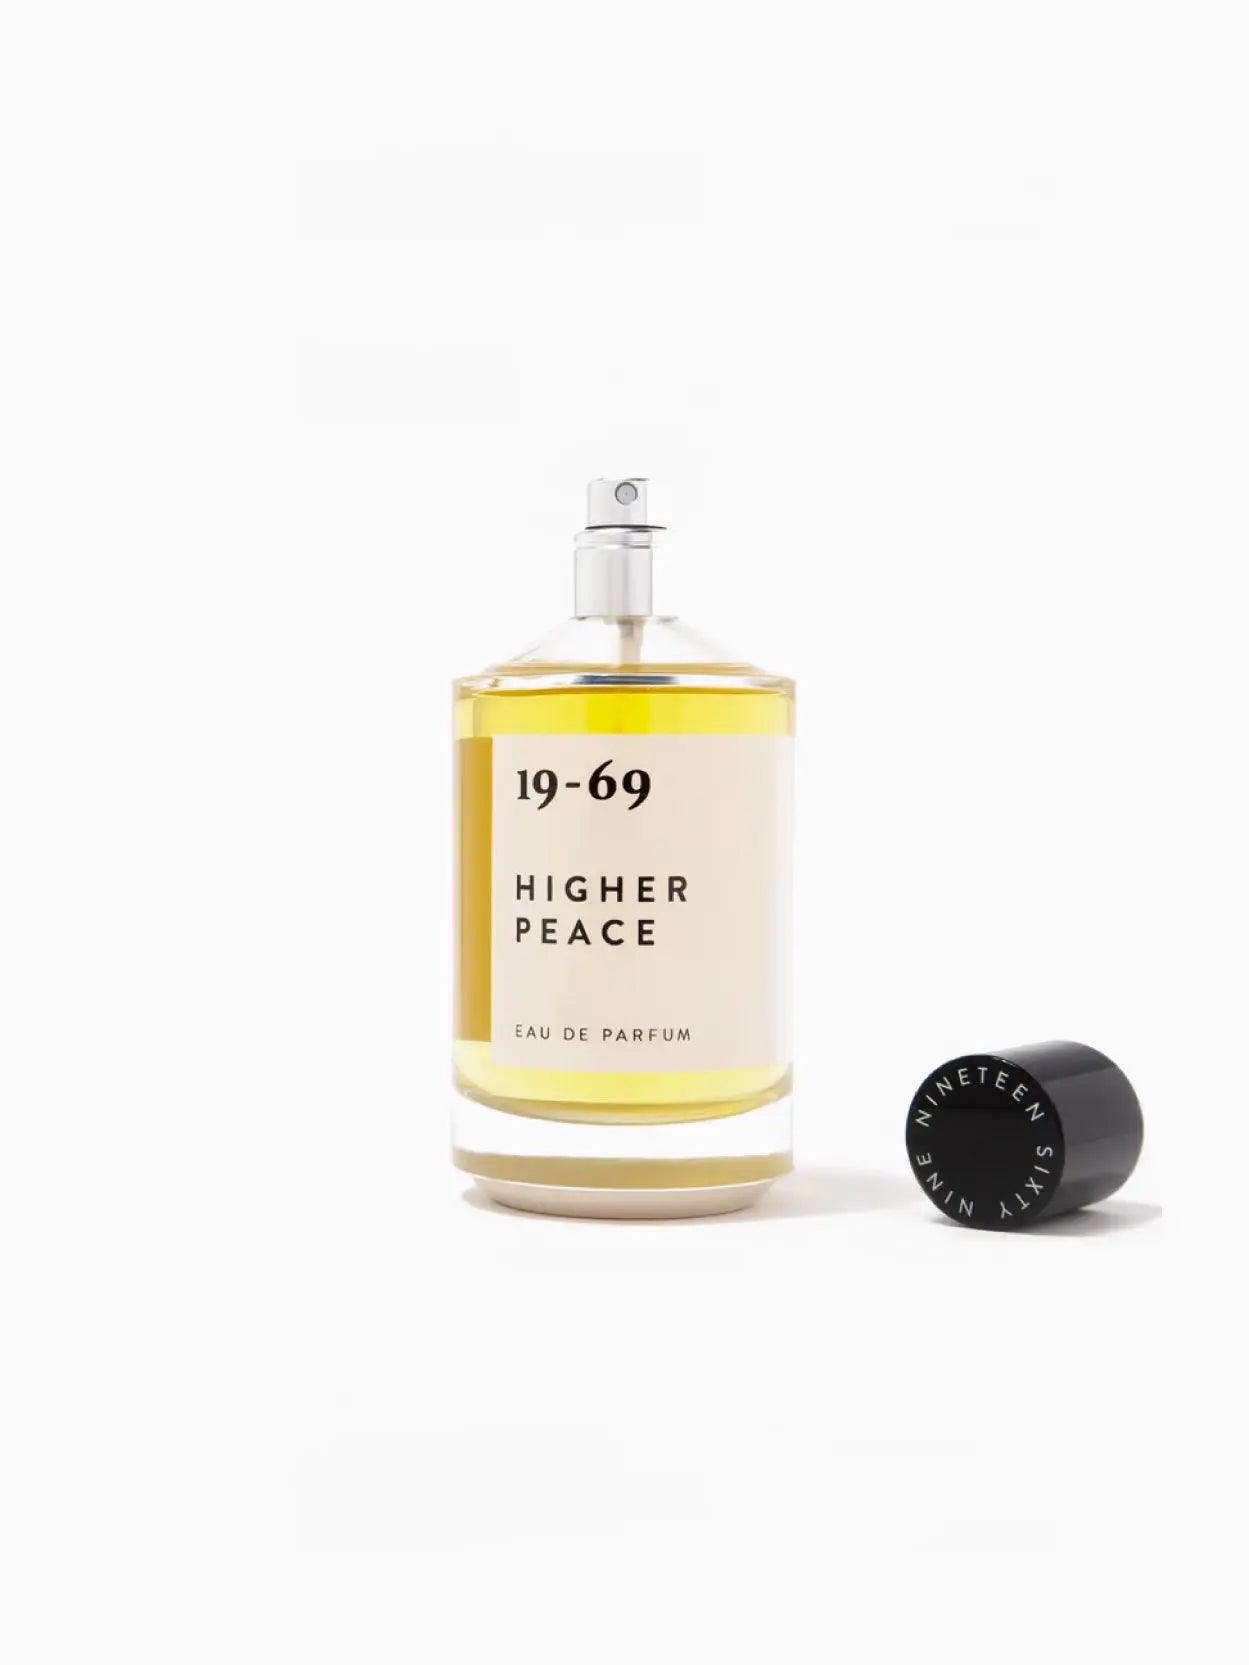 A bottle of perfume with a yellow liquid inside. The label reads "Higher Peace 100ml." The bottle, available at Bassalstore in Barcelona, features a black cap and minimalist design against a plain white background.